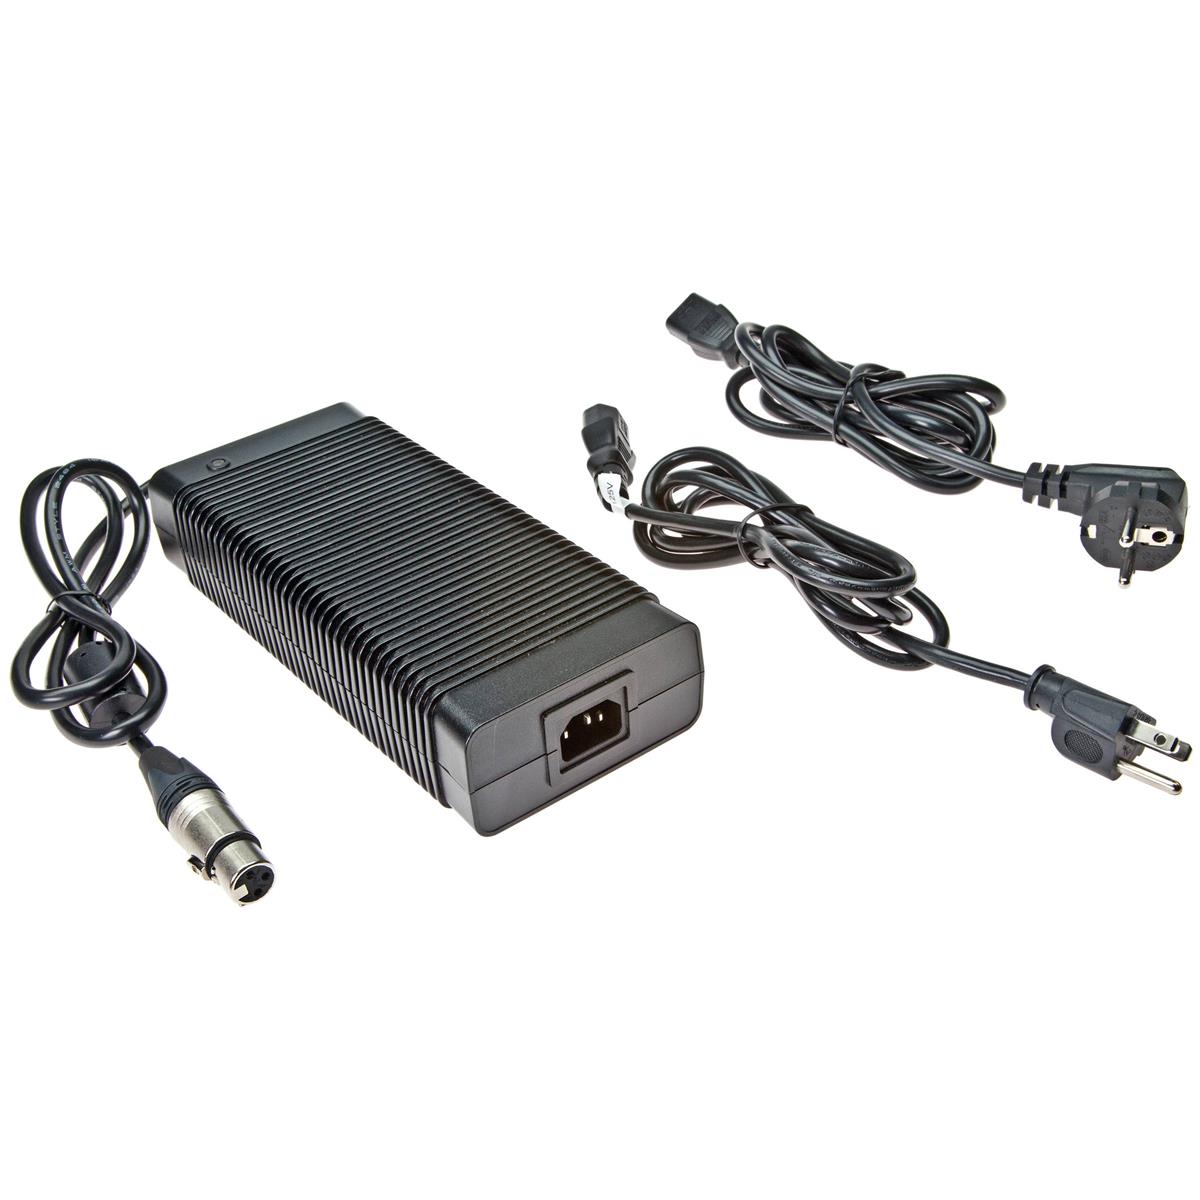 Image of Kino Flo 280W Power Supply for Block Battery Charger